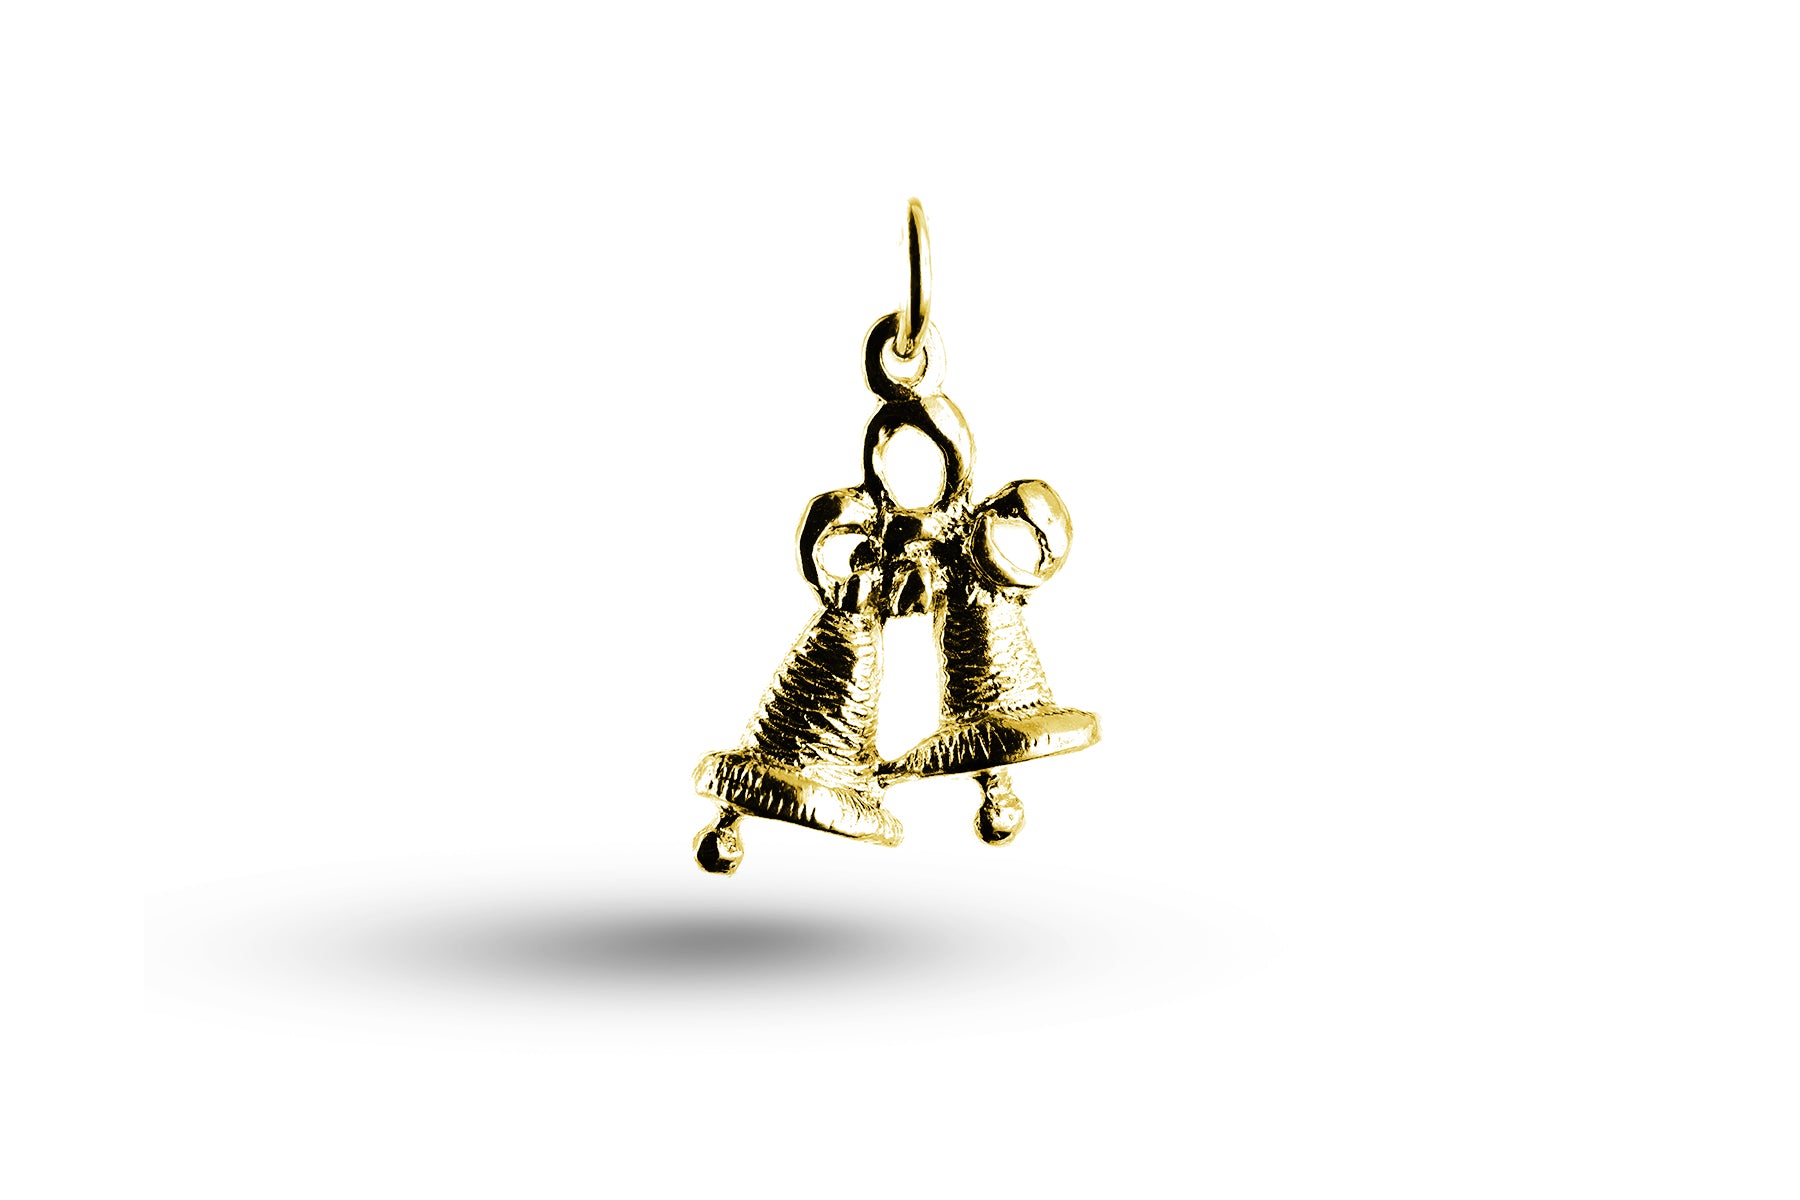 Yellow gold Wedding Bells with Bow charm.